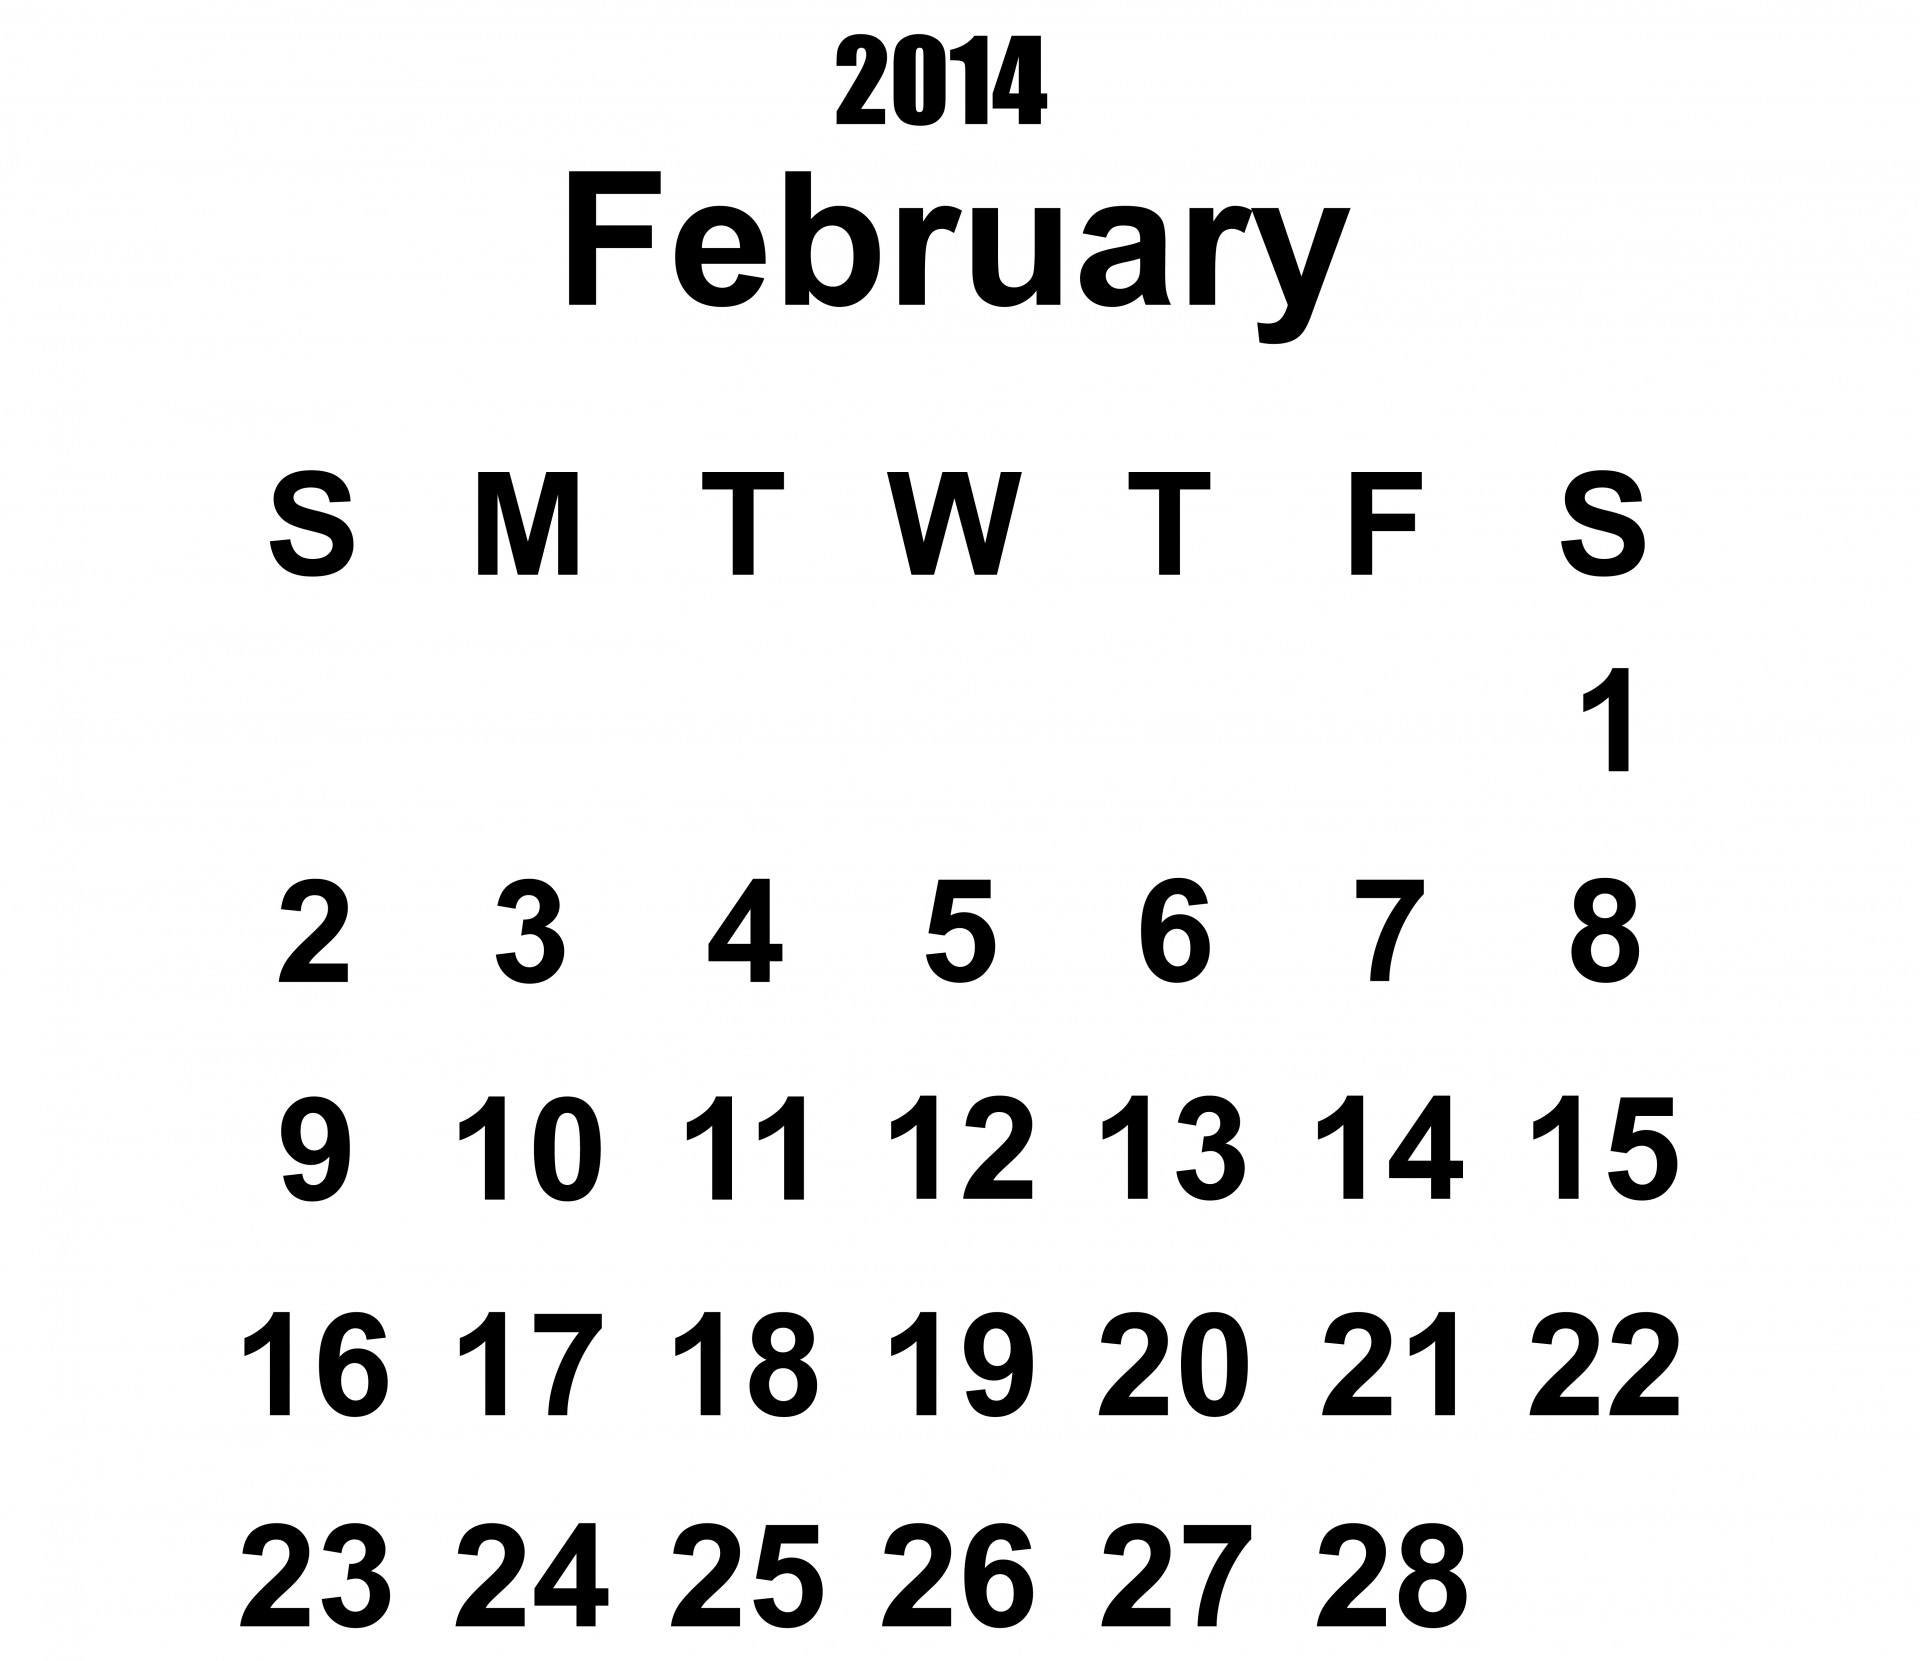 2014 calendar february,2014 calendar,2104,february,calendar - free image  from